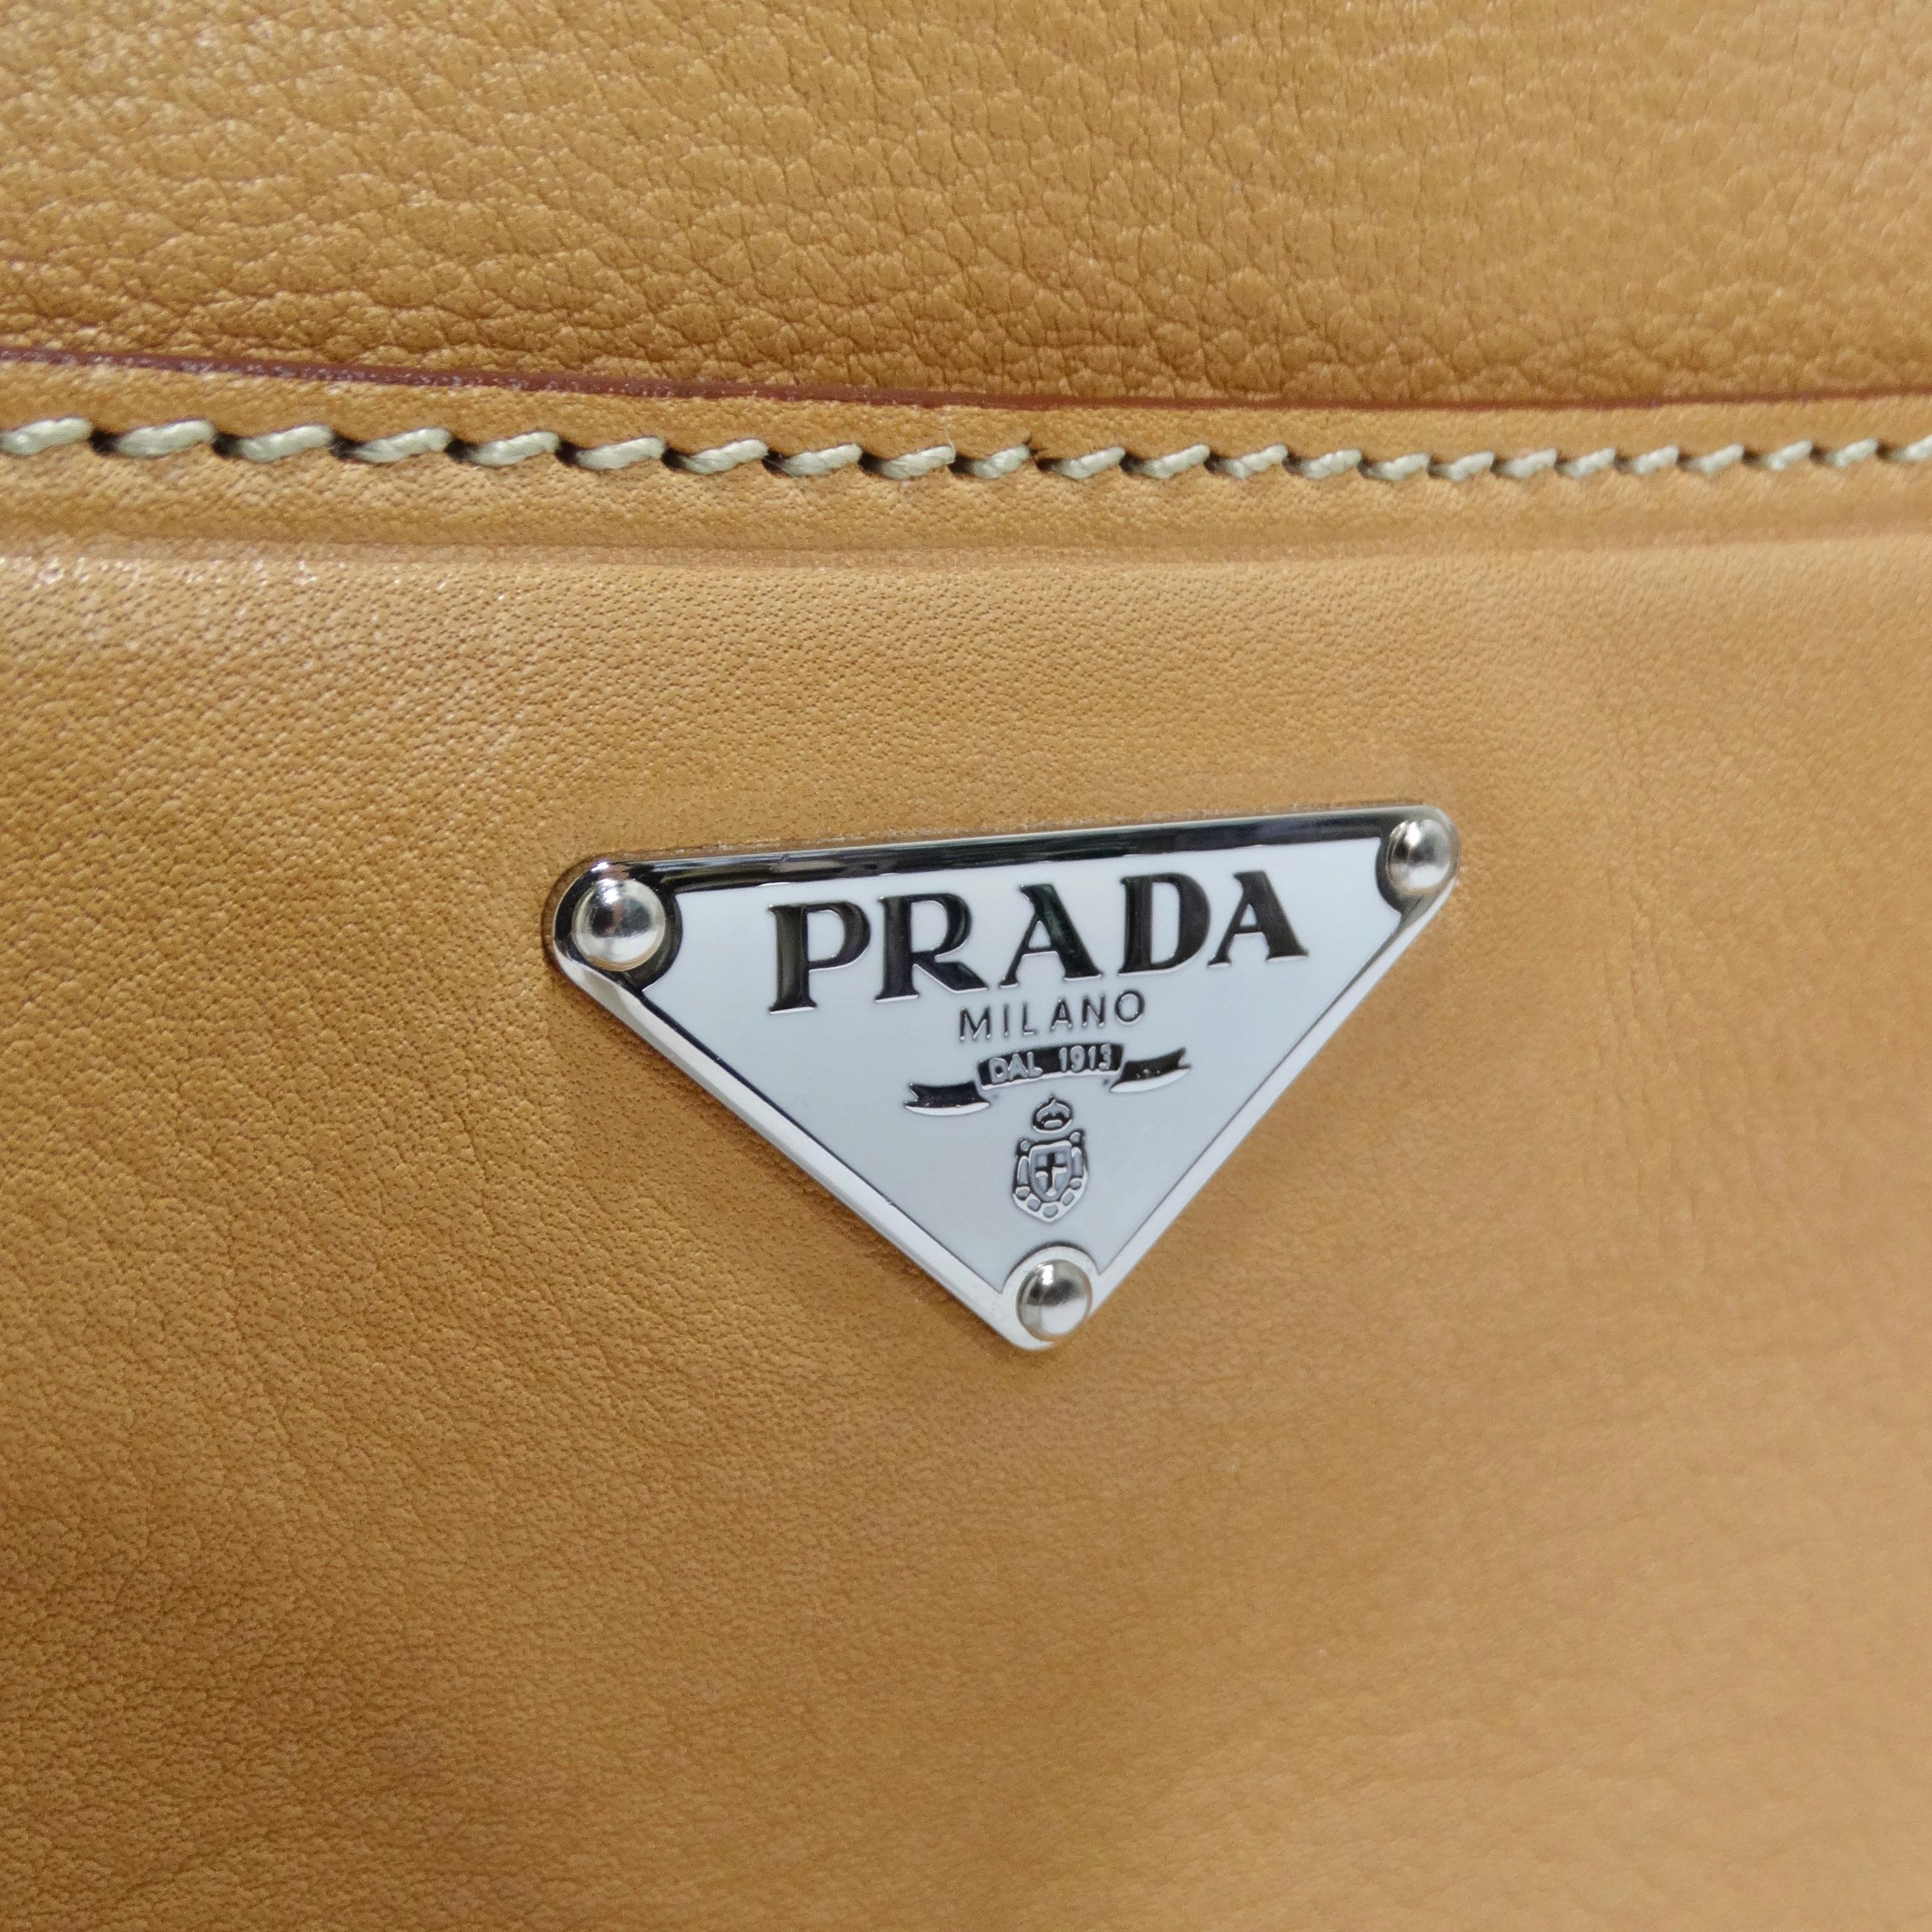 Prada 2000s Camel Leather Top Handle Bag In Good Condition For Sale In Scottsdale, AZ